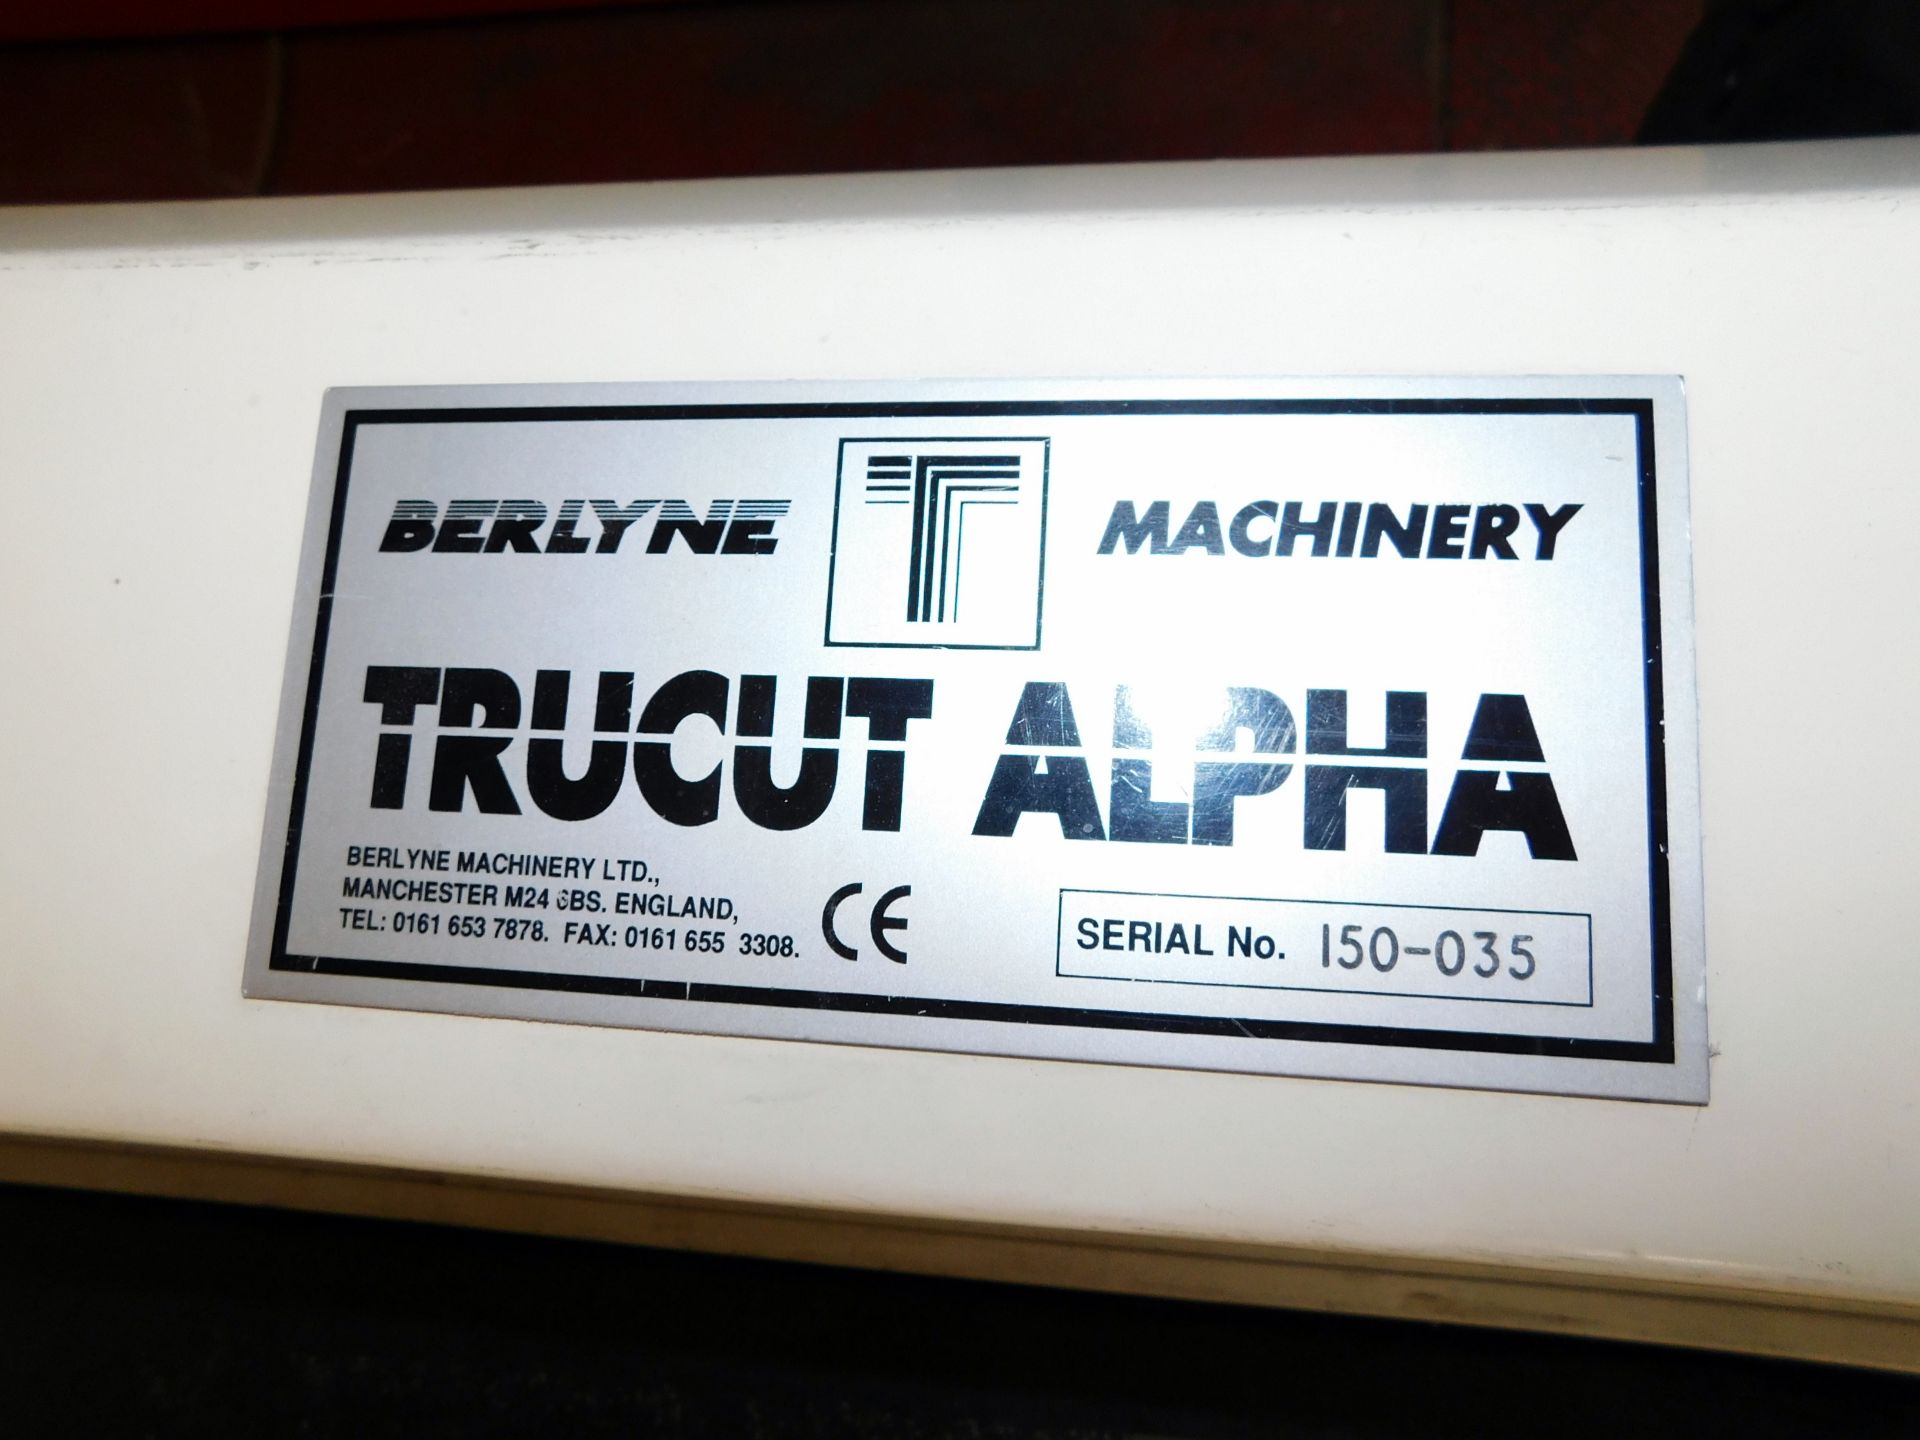 Berlyne Trucut Alpha Mounting Cutter, Serial Number 150-35 With Tower PC (Collection – Friday - Image 5 of 7